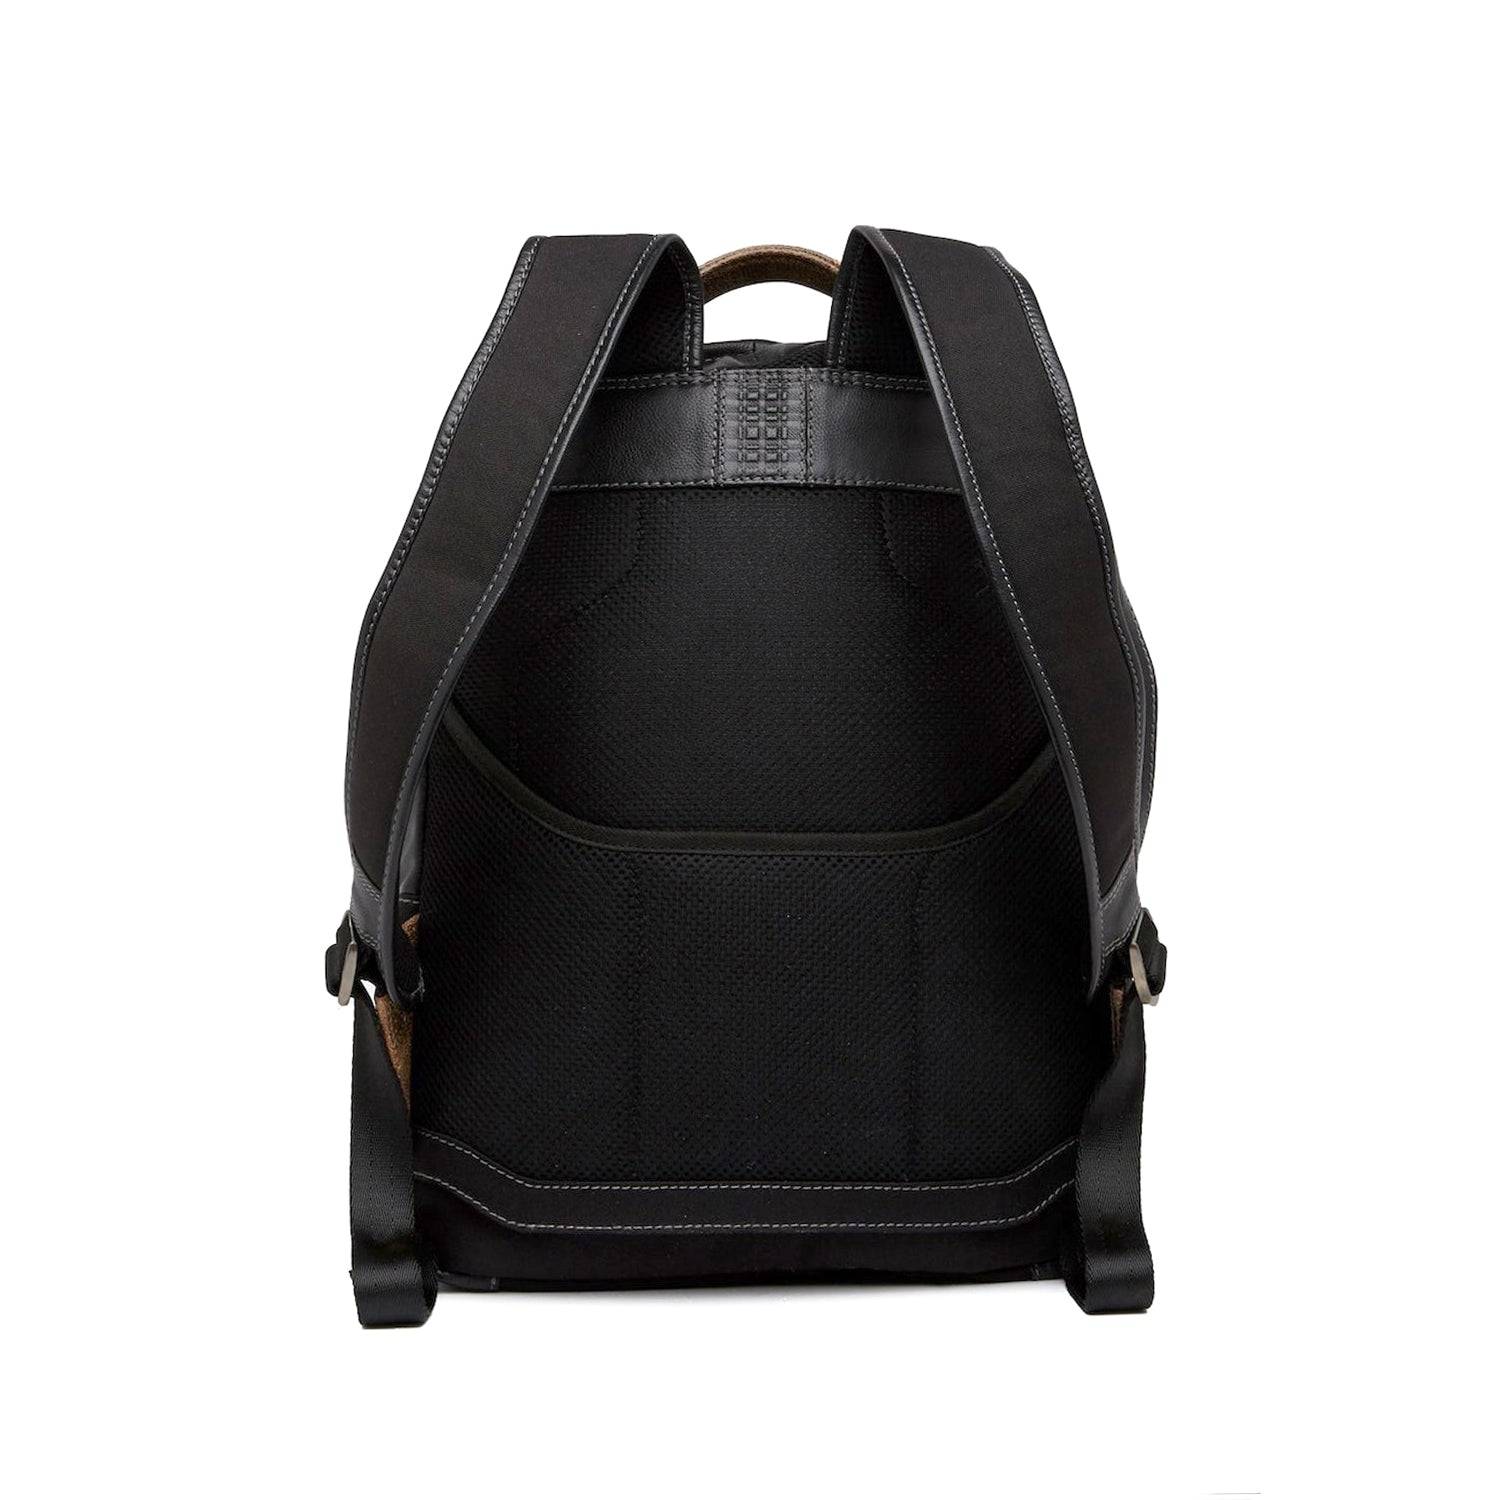 24 Vegan Leather Backpacks For Back To School or Everyday (2022 Update!)